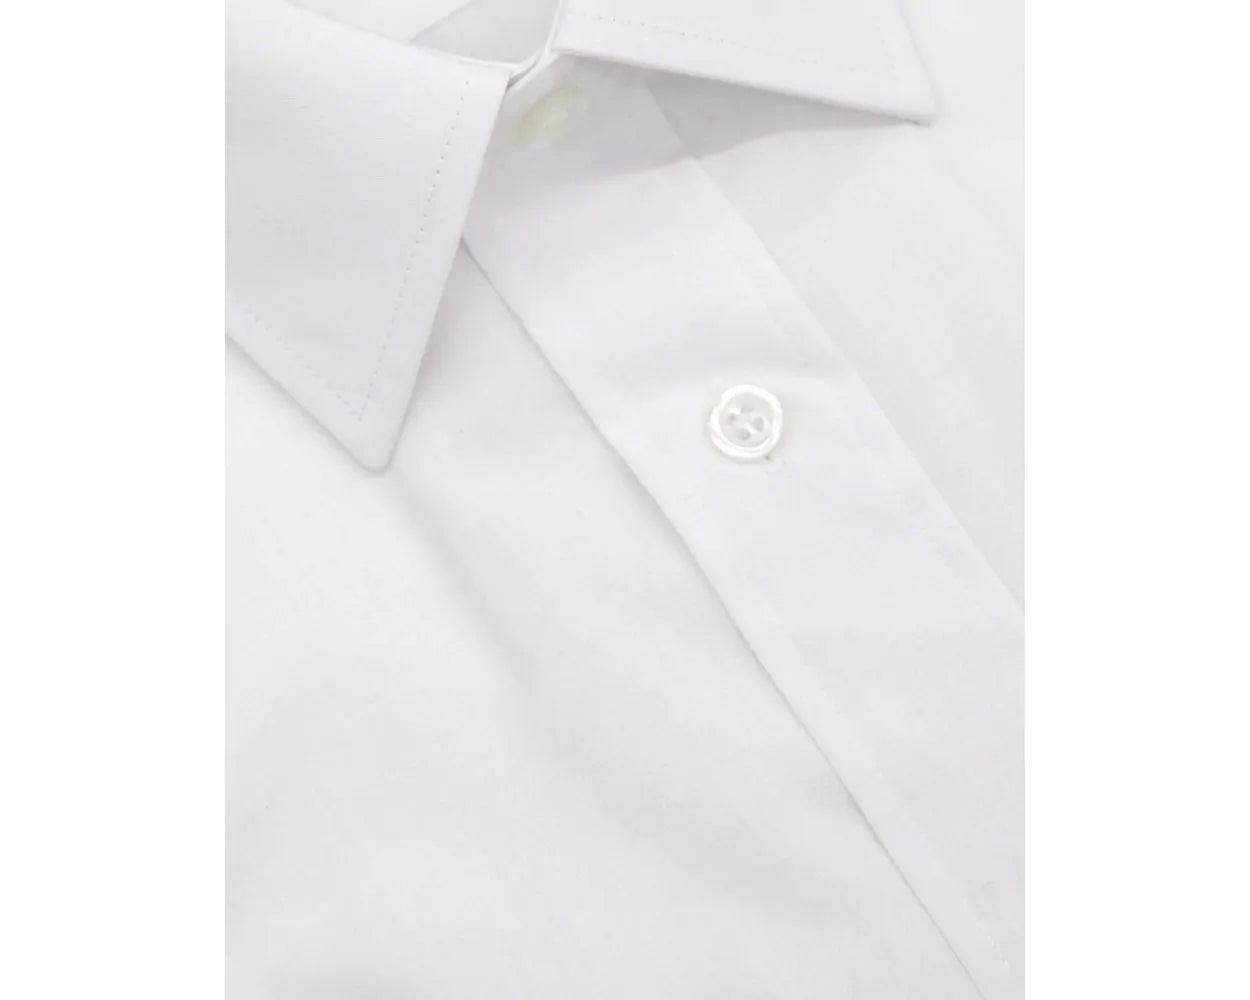 DOUBLE TWO WHITE CLASSIC EASY CARE LONG SLEEVE SHIRT